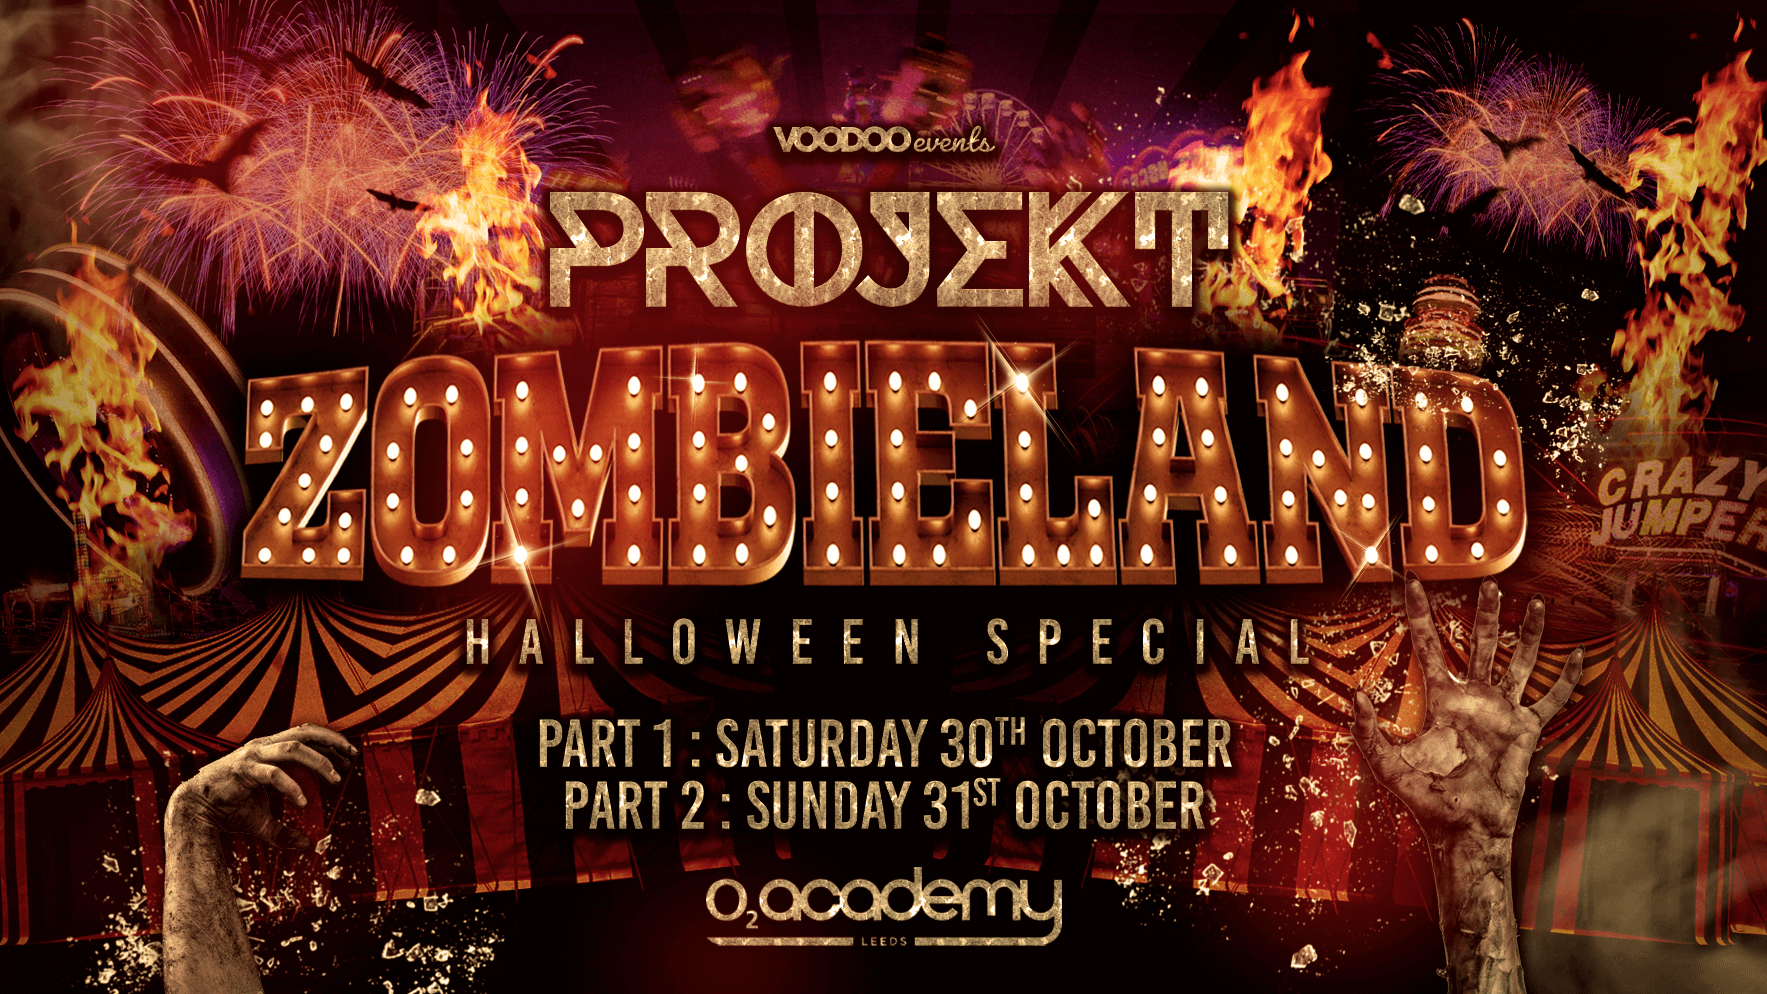 Projekt Zombieland Halloween Special Part 2 at the O2 Academy- 31st October